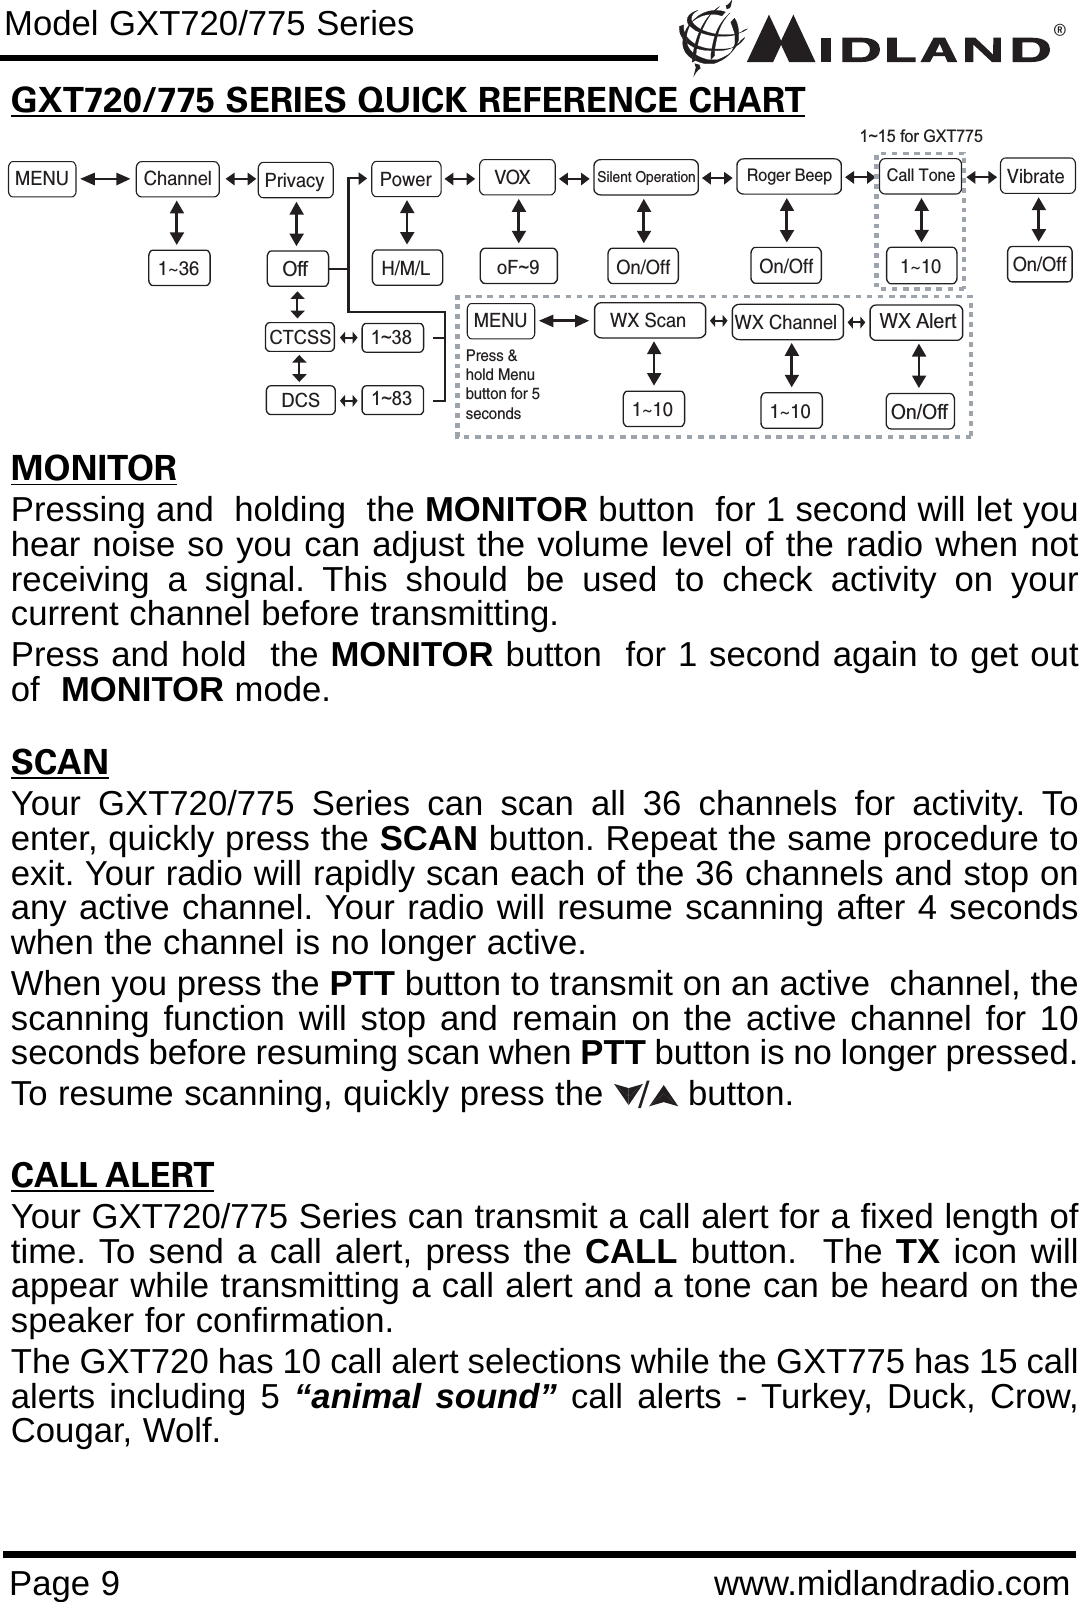 ®Page 9 www.midlandradio.comGXT720/775 SERIES QUICK REFERENCE CHARTMONITORPressing and  holding  the MONITOR button  for 1 second will let youhear noise so you can adjust the volume level of the radio when notreceiving a signal. This should be used to check activity on yourcurrent channel before transmitting. Press and hold  the MONITOR button  for 1 second again to get outof  MONITOR mode.SCANYour GXT720/775 Series can scan all 36 channels for activity. Toenter, quickly press the SCAN button. Repeat the same procedure toexit. Your radio will rapidly scan each of the 36 channels and stop onany active channel. Your radio will resume scanning after 4 secondswhen the channel is no longer active.When you press the PTT button to transmit on an active  channel, thescanning function will stop and remain on the active channel for 10seconds before resuming scan when PTT button is no longer pressed. To resume scanning, quickly press the  button.CALL ALERTYour GXT720/775 Series can transmit a call alert for a fixed length oftime. To send a call alert, press the CALL button.  The TX icon willappear while transmitting a call alert and a tone can be heard on thespeaker for confirmation. The GXT720 has 10 call alert selections while the GXT775 has 15 callalerts including 5 “animal sound” call alerts - Turkey, Duck, Crow,Cougar, Wolf.Model GXT720/775 SeriesMENU Channel VOX1~36Privacy Roger BeepOn/OffPowerH/M/LCall Tone1~10VibrateOn/OffWX Scan1~10Press &amp;hold Menubutton for 5secondsSilent OperationOn/OffoF~9OffCTCSSDCS1~381~831~15 for GXT775WX Channel1~10WX AlertOn/OffMENU/